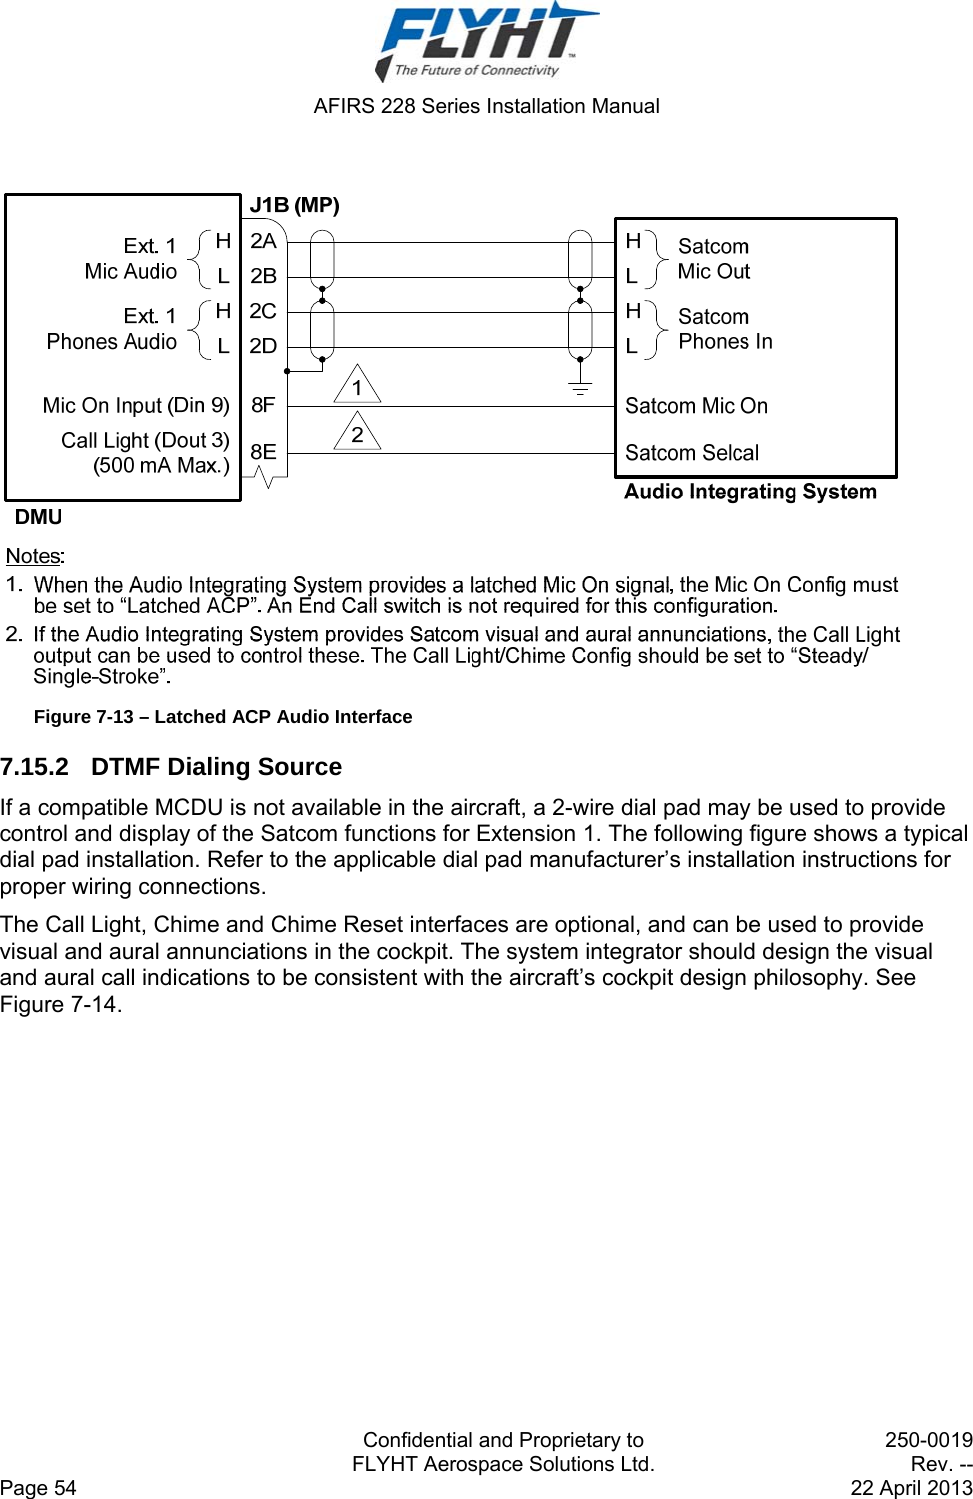  AFIRS 228 Series Installation Manual   Confidential and Proprietary to  250-0019   FLYHT Aerospace Solutions Ltd.  Rev. -- Page 54    22 April 2013   Figure 7-13 – Latched ACP Audio Interface 7.15.2  DTMF Dialing Source If a compatible MCDU is not available in the aircraft, a 2-wire dial pad may be used to provide control and display of the Satcom functions for Extension 1. The following figure shows a typical dial pad installation. Refer to the applicable dial pad manufacturer’s installation instructions for proper wiring connections. The Call Light, Chime and Chime Reset interfaces are optional, and can be used to provide visual and aural annunciations in the cockpit. The system integrator should design the visual and aural call indications to be consistent with the aircraft’s cockpit design philosophy. See Figure 7-14. 